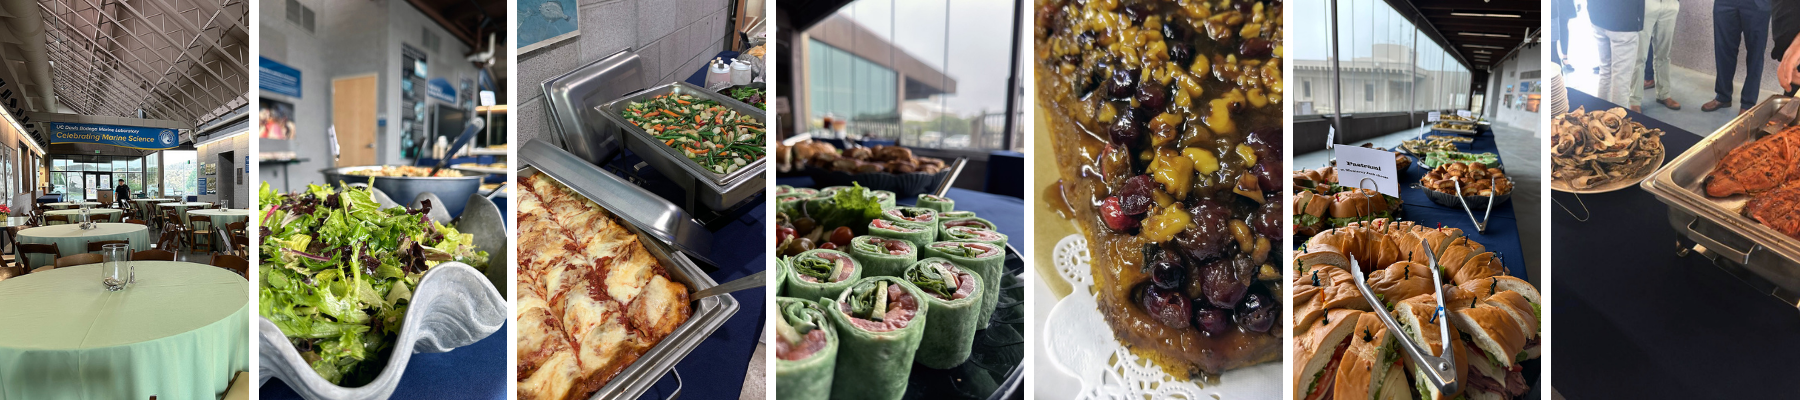 A collage of images showing different dining options, including sandwiches, salads, barbecued oysters, and cakes.